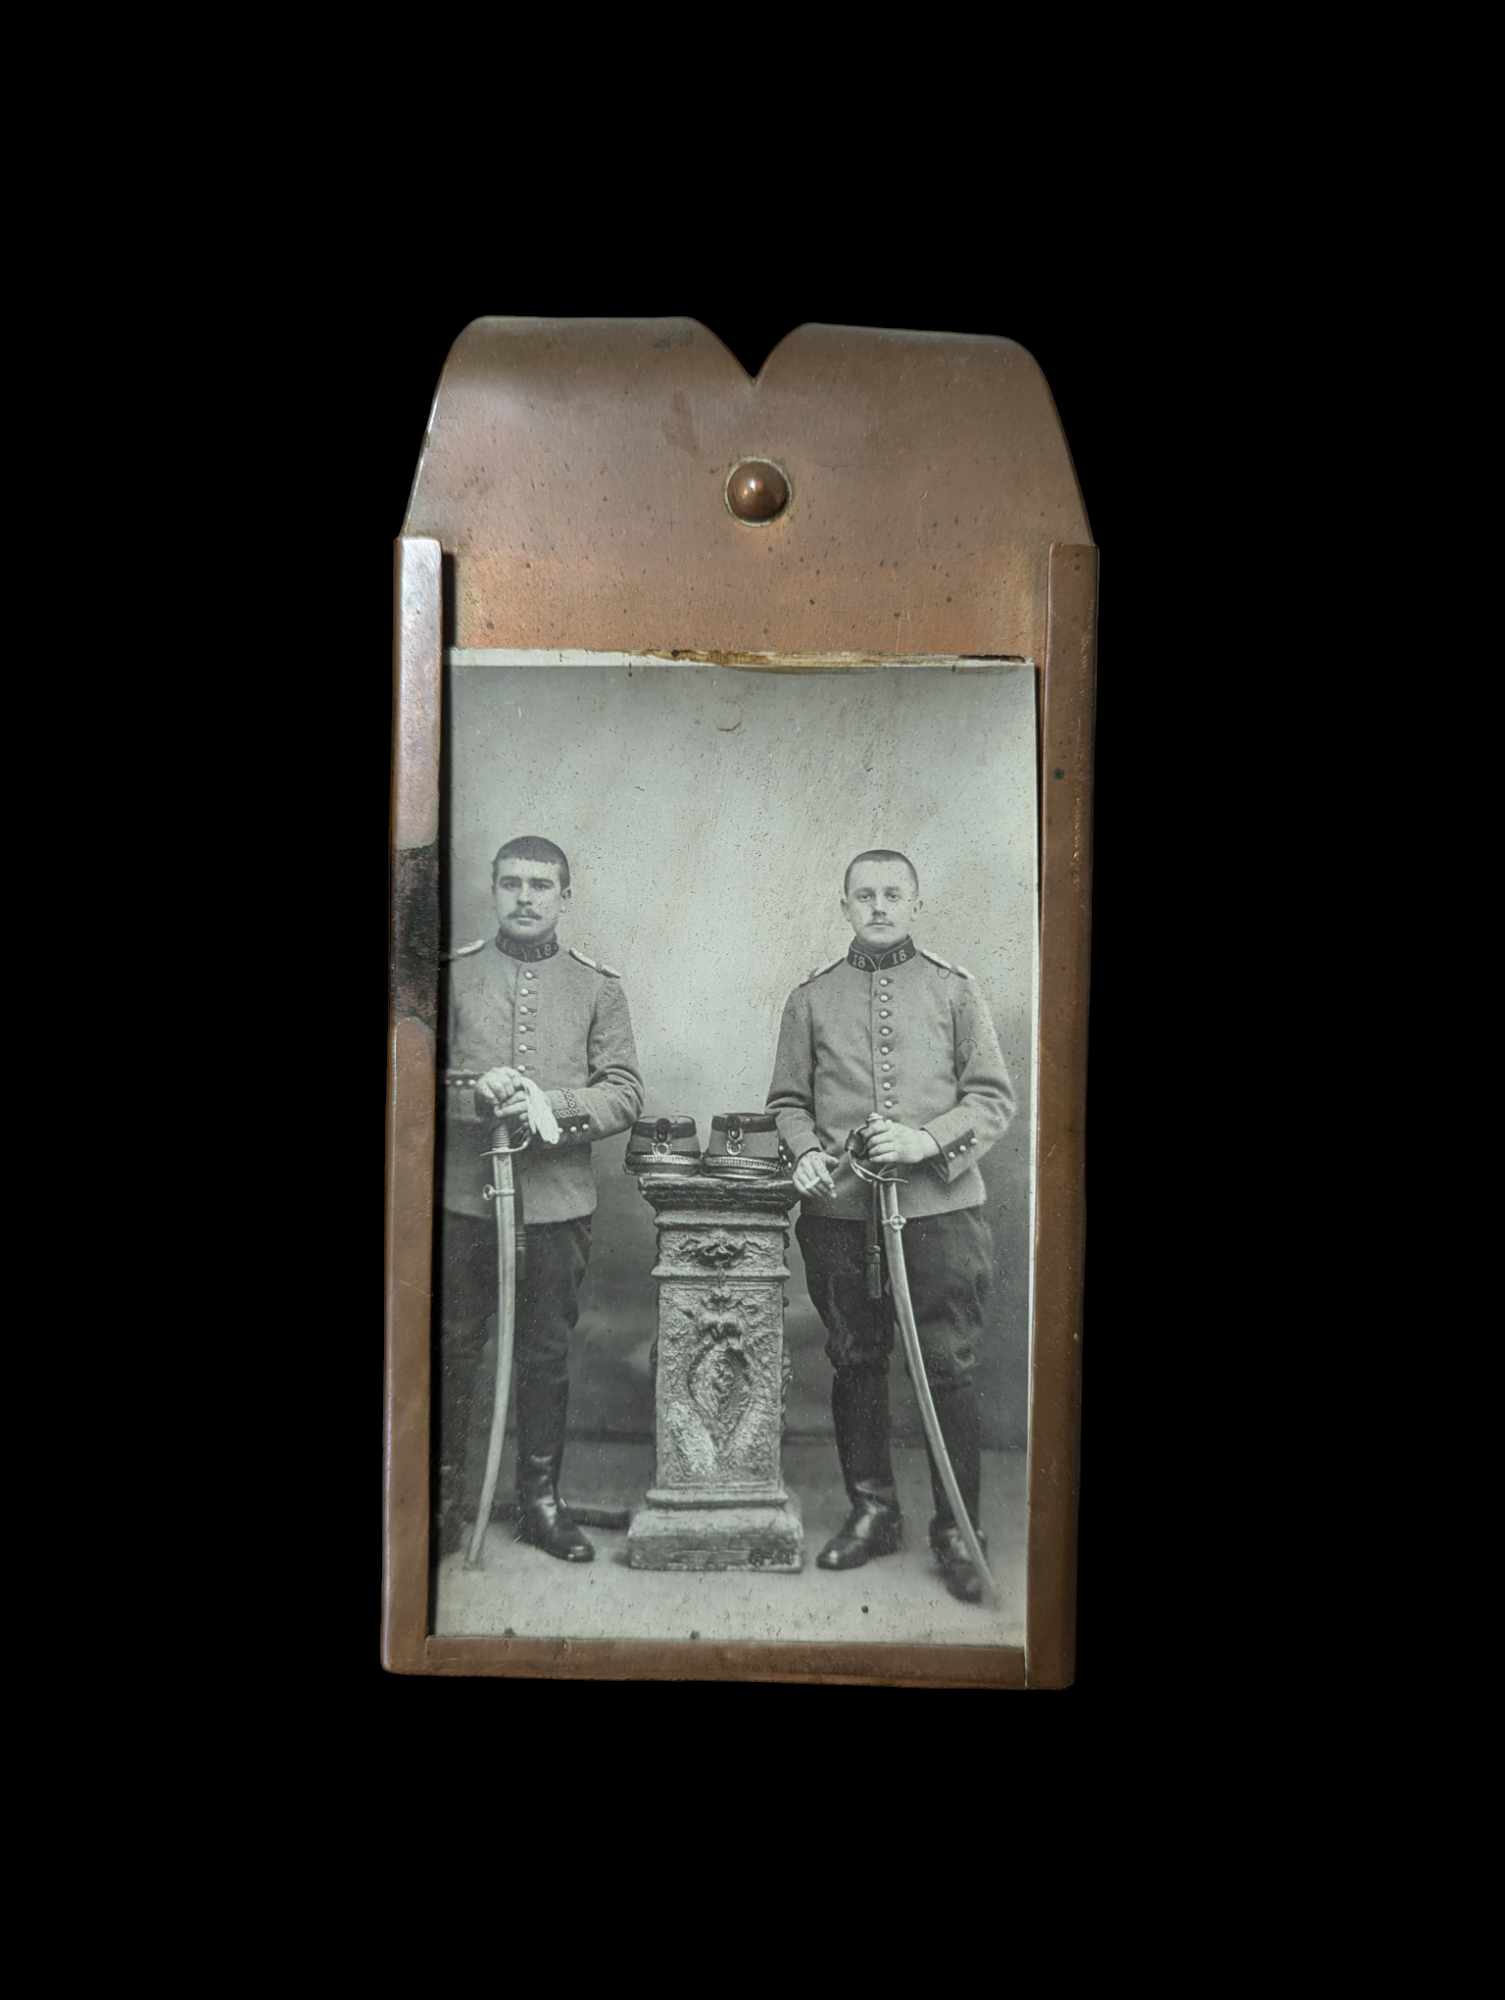 militaria : Cadre photo 14 bataillon chasseur à cheval / french ww1 trench art frame